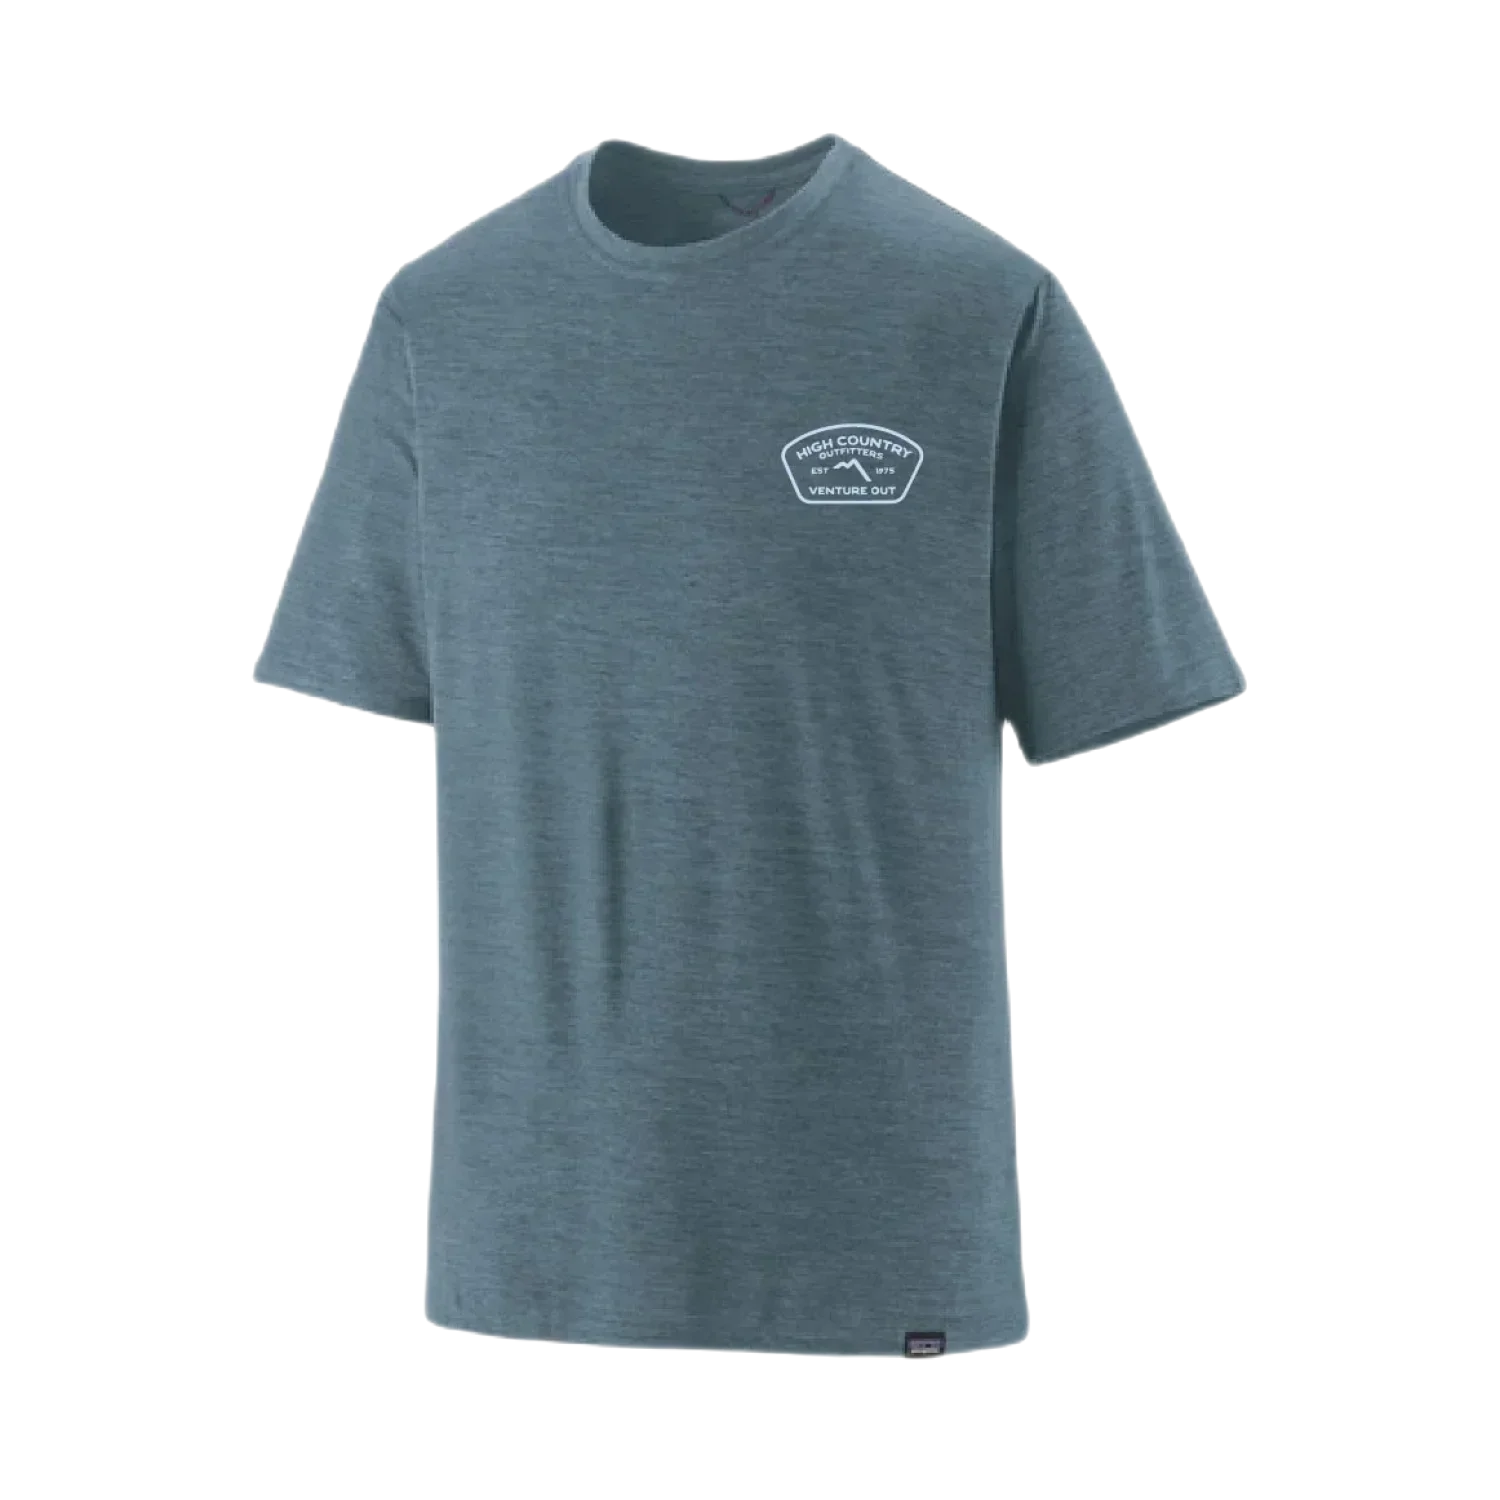 High Country Outfitters 01. MENS APPAREL - MENS SS SHIRTS - MENS SS ACTIVE Men's HC Capilene Cool Daily Shirt UTBX UTILITY BLUE - LIGHT UTILITY BLUE X-DYE